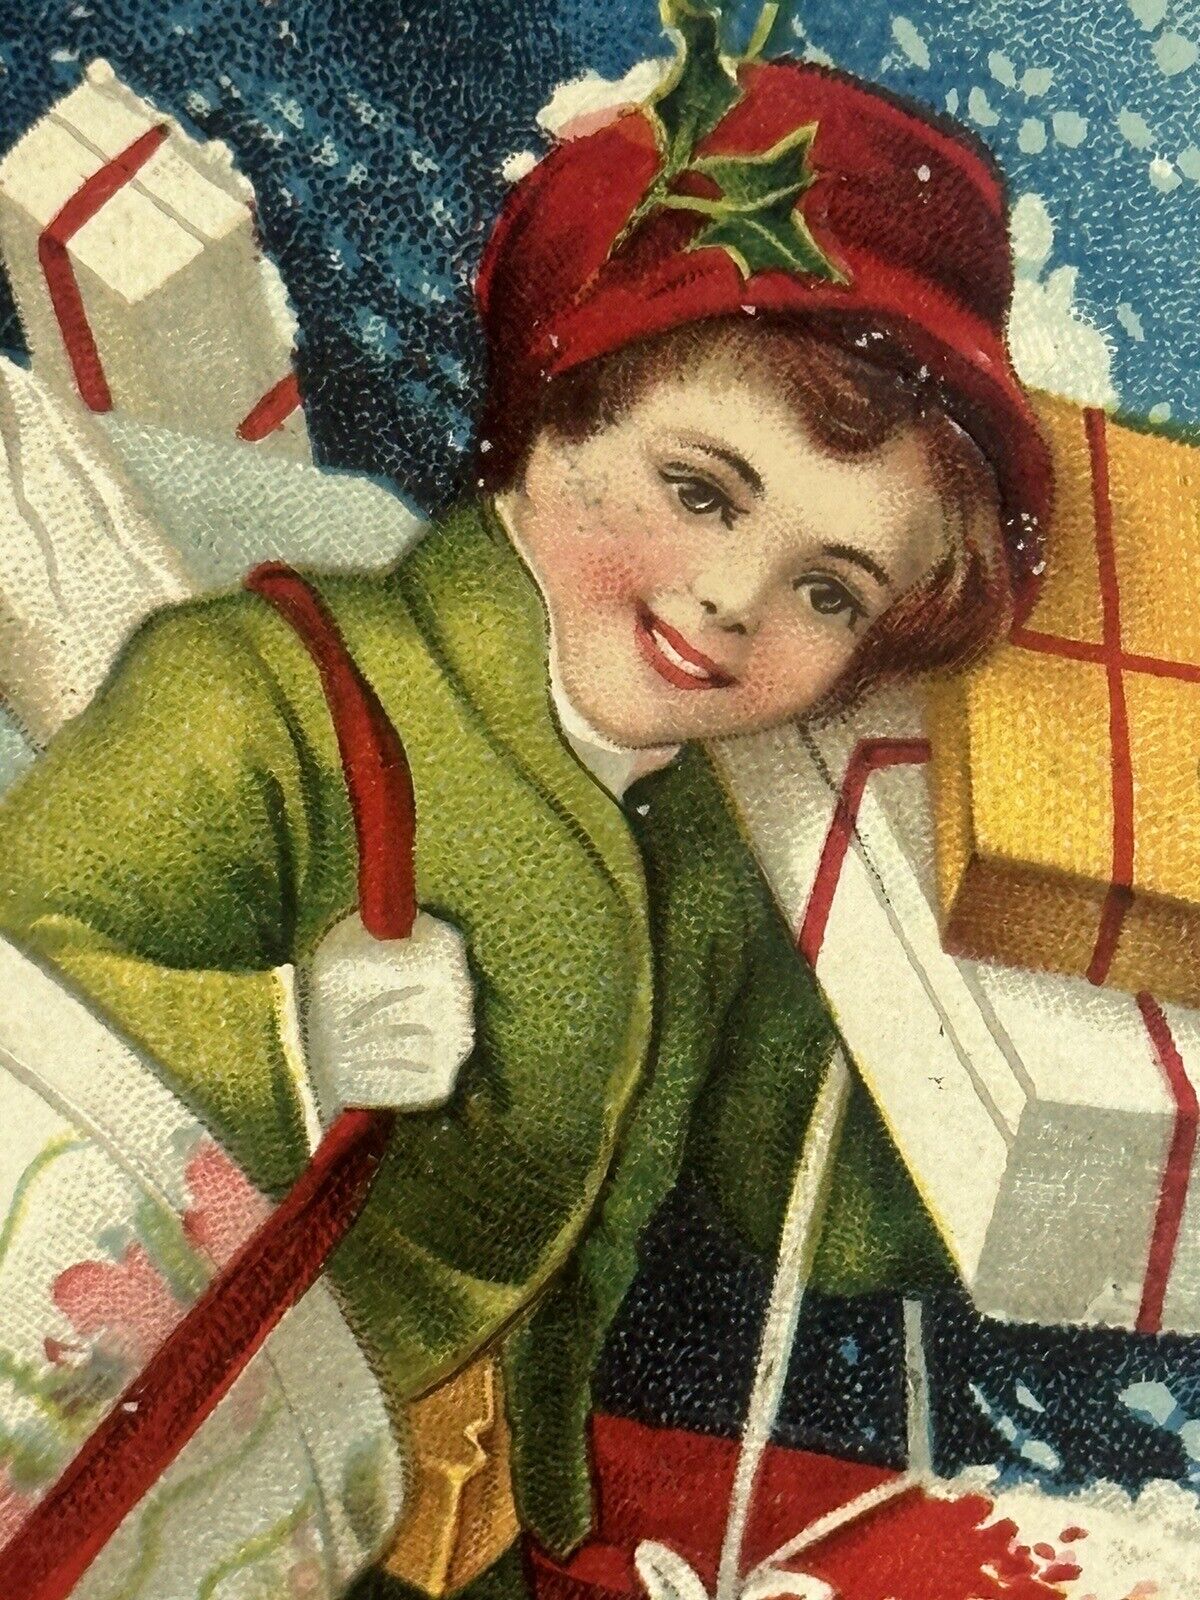 Clapsaddle Christmas Postcard Children Girl Shopping Brings Home Gifts Snowy